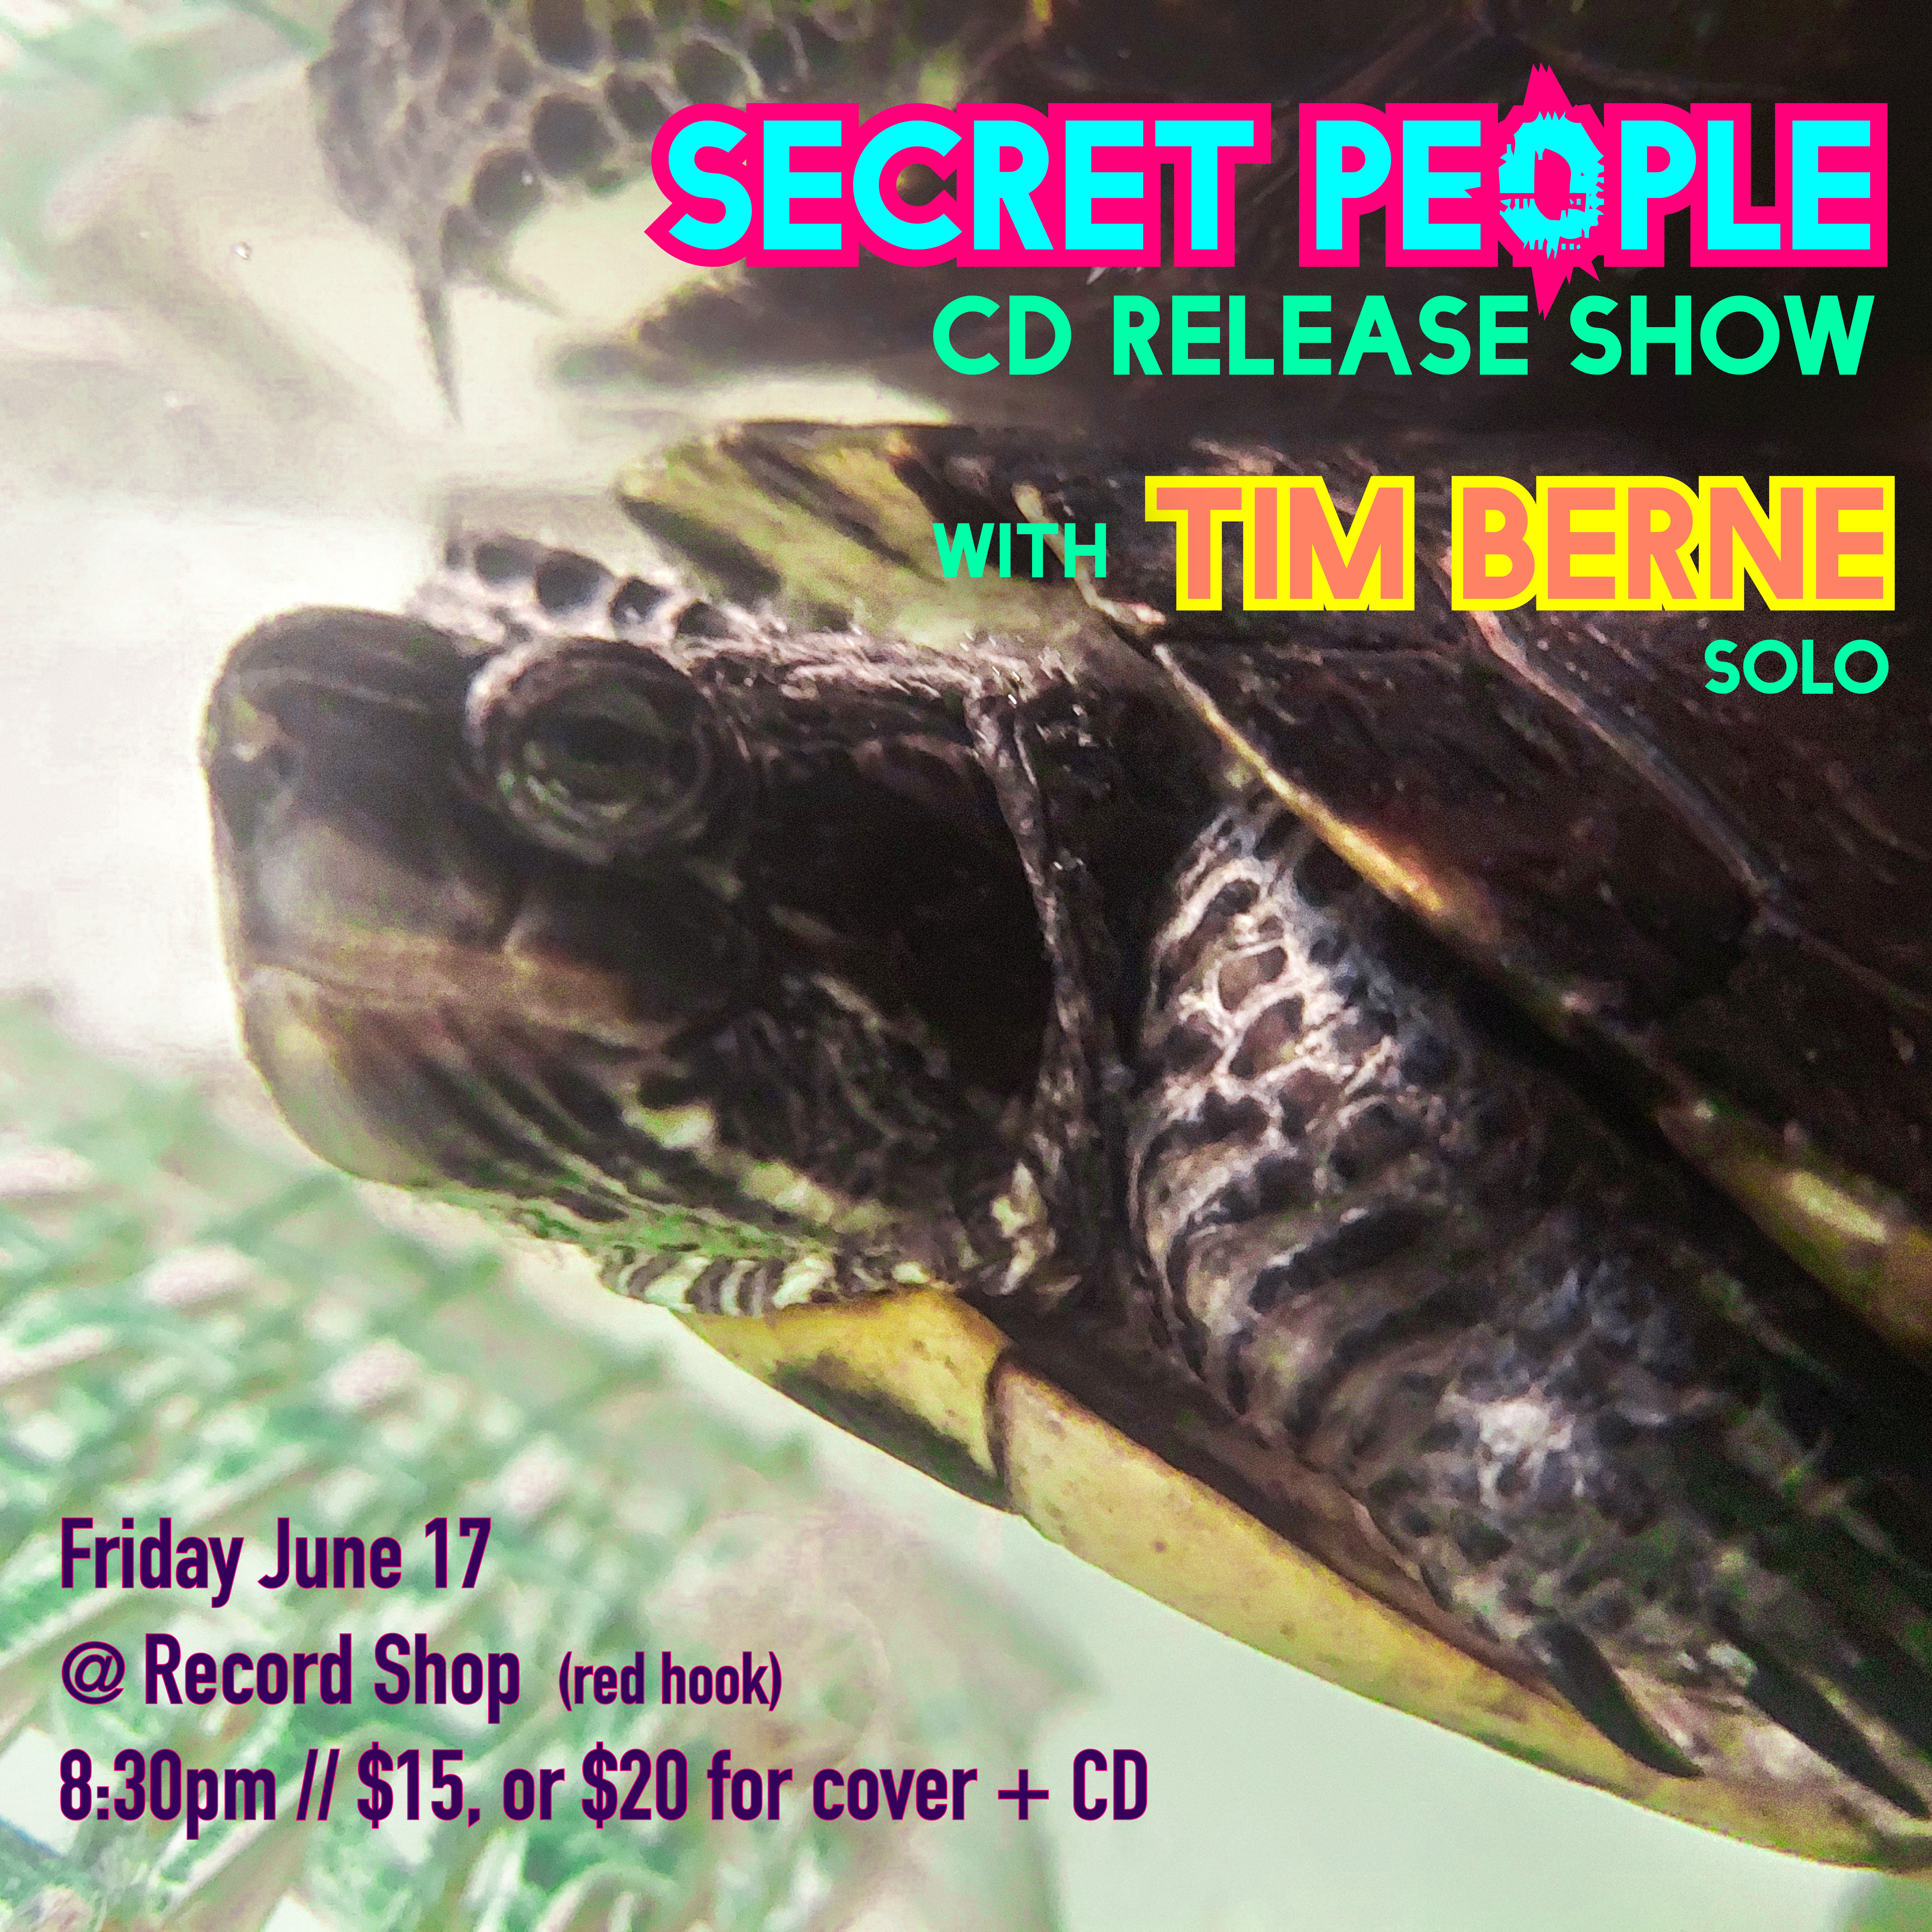 Secret People CD release show with Tim Berne solo poster